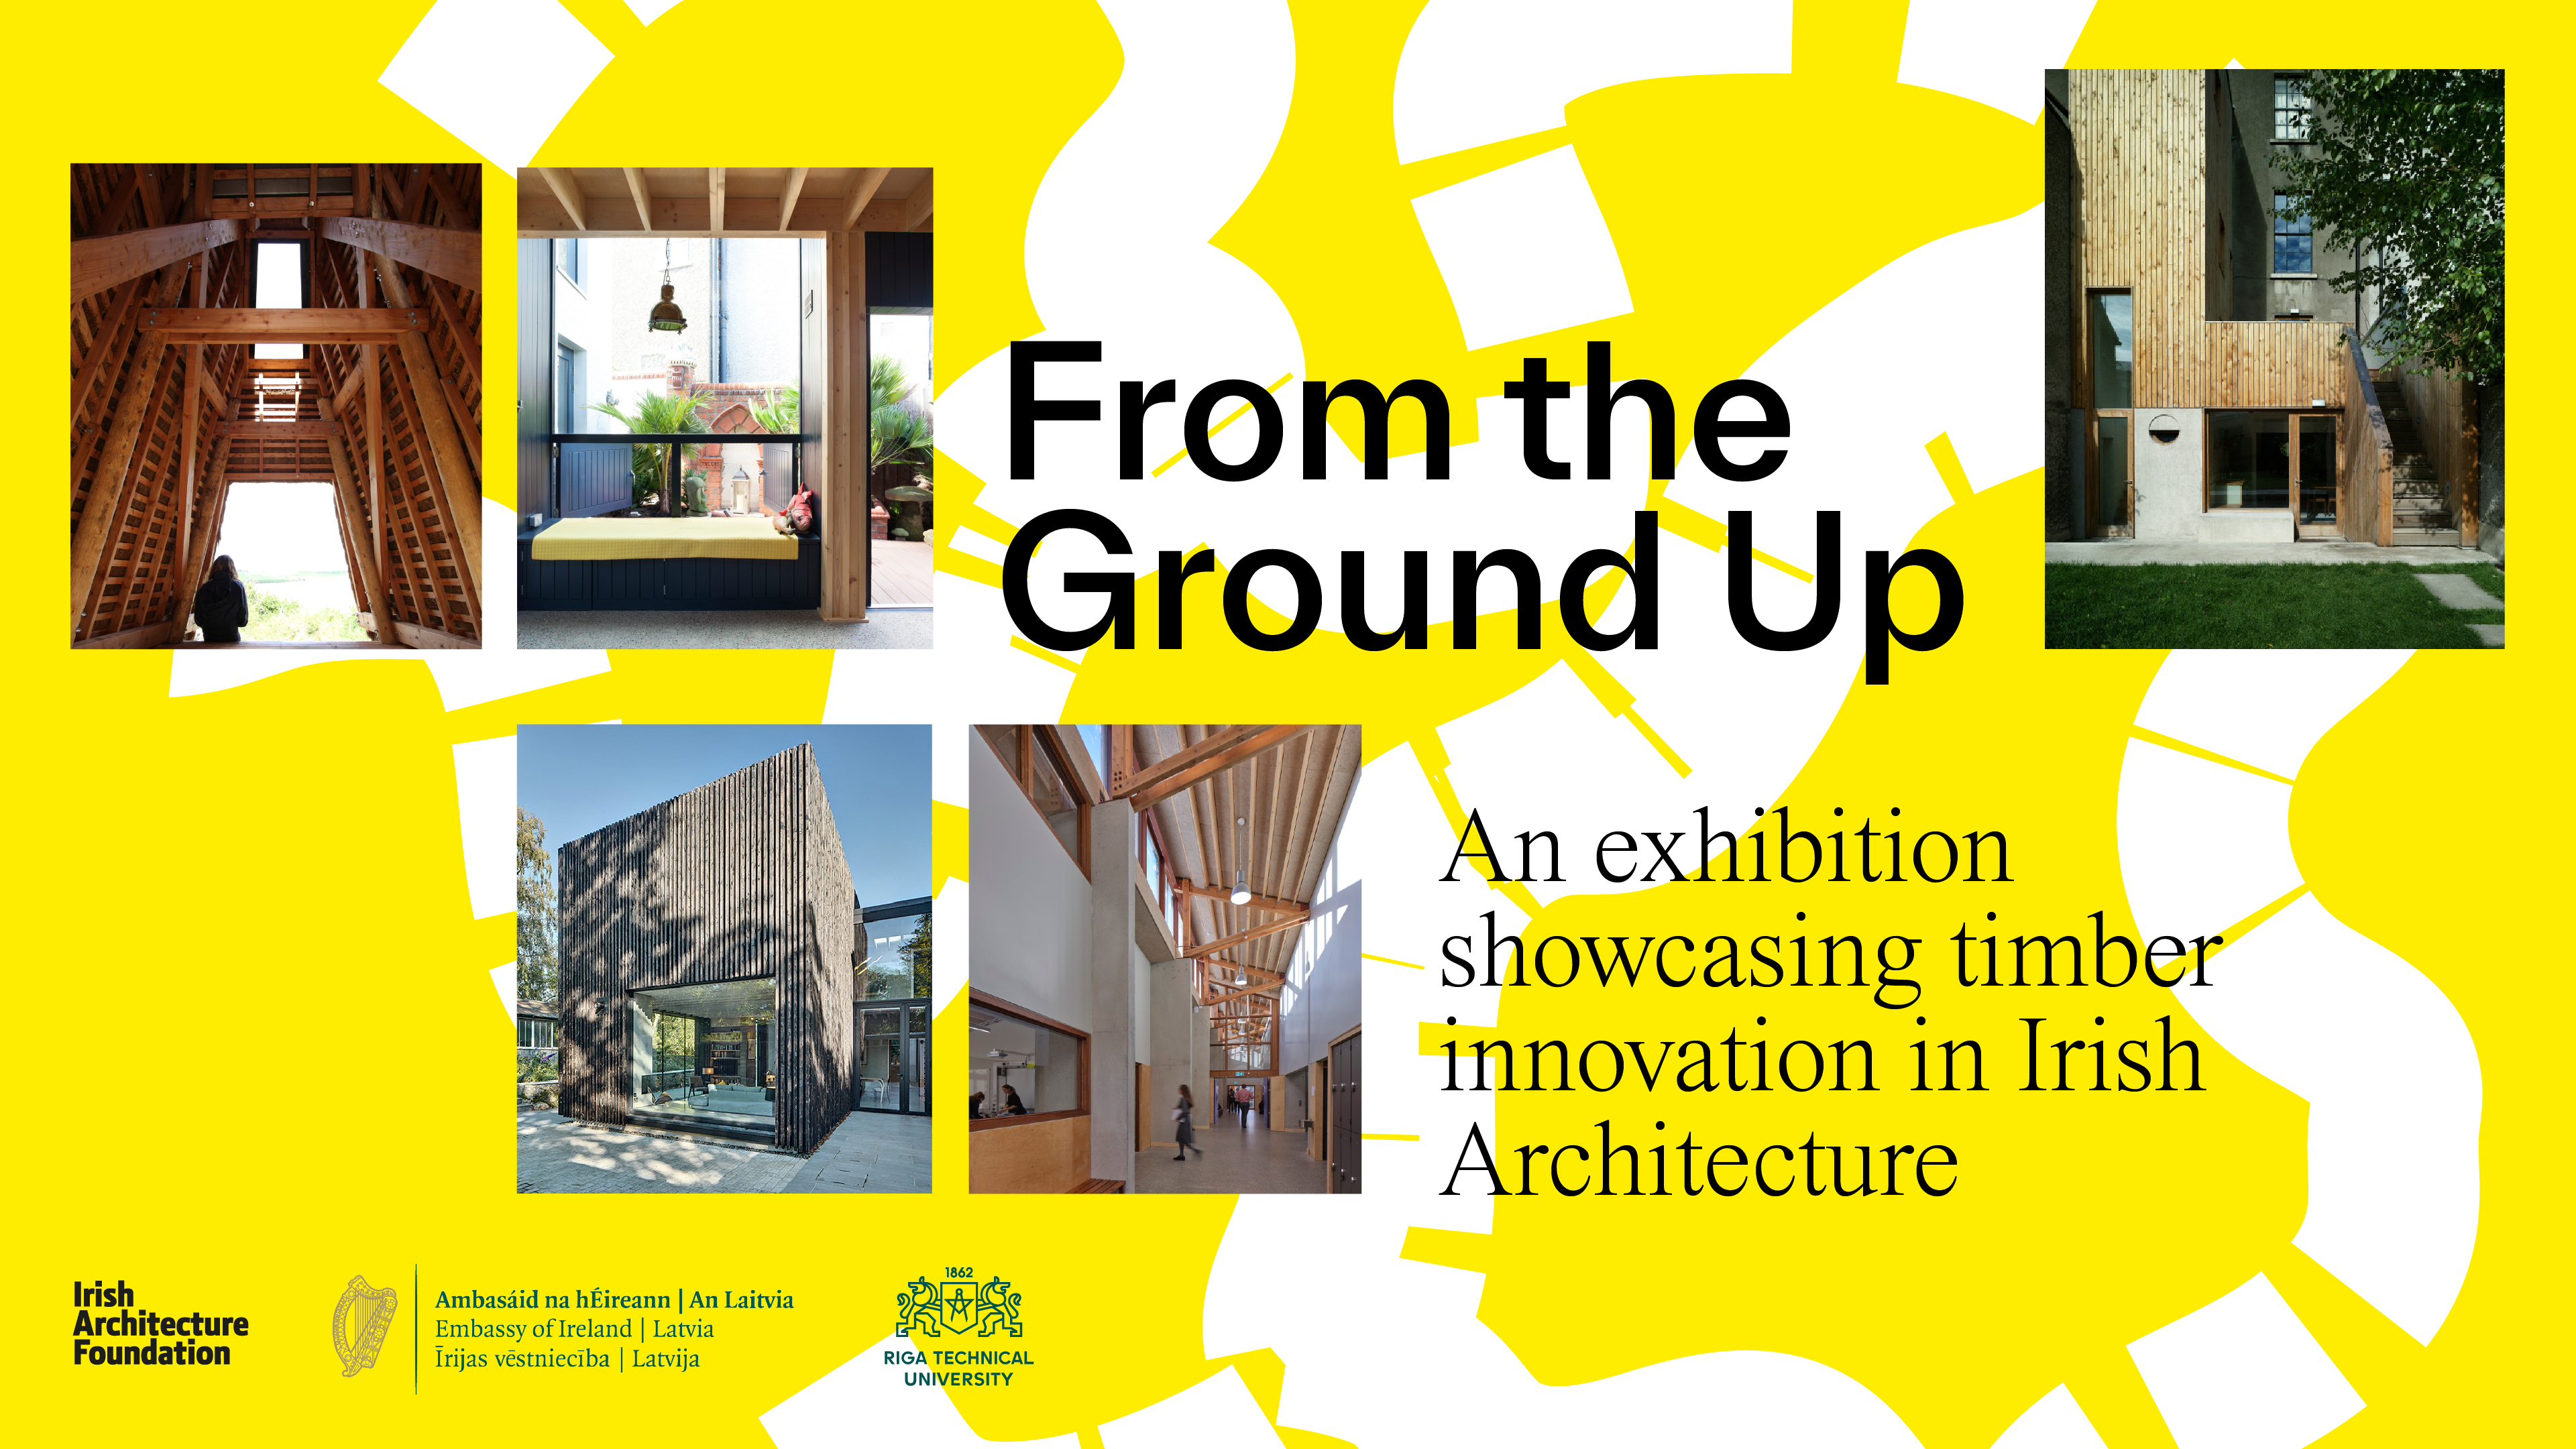 'From the Ground Up' an exhibition showcasing timber innovation in Irish architecture